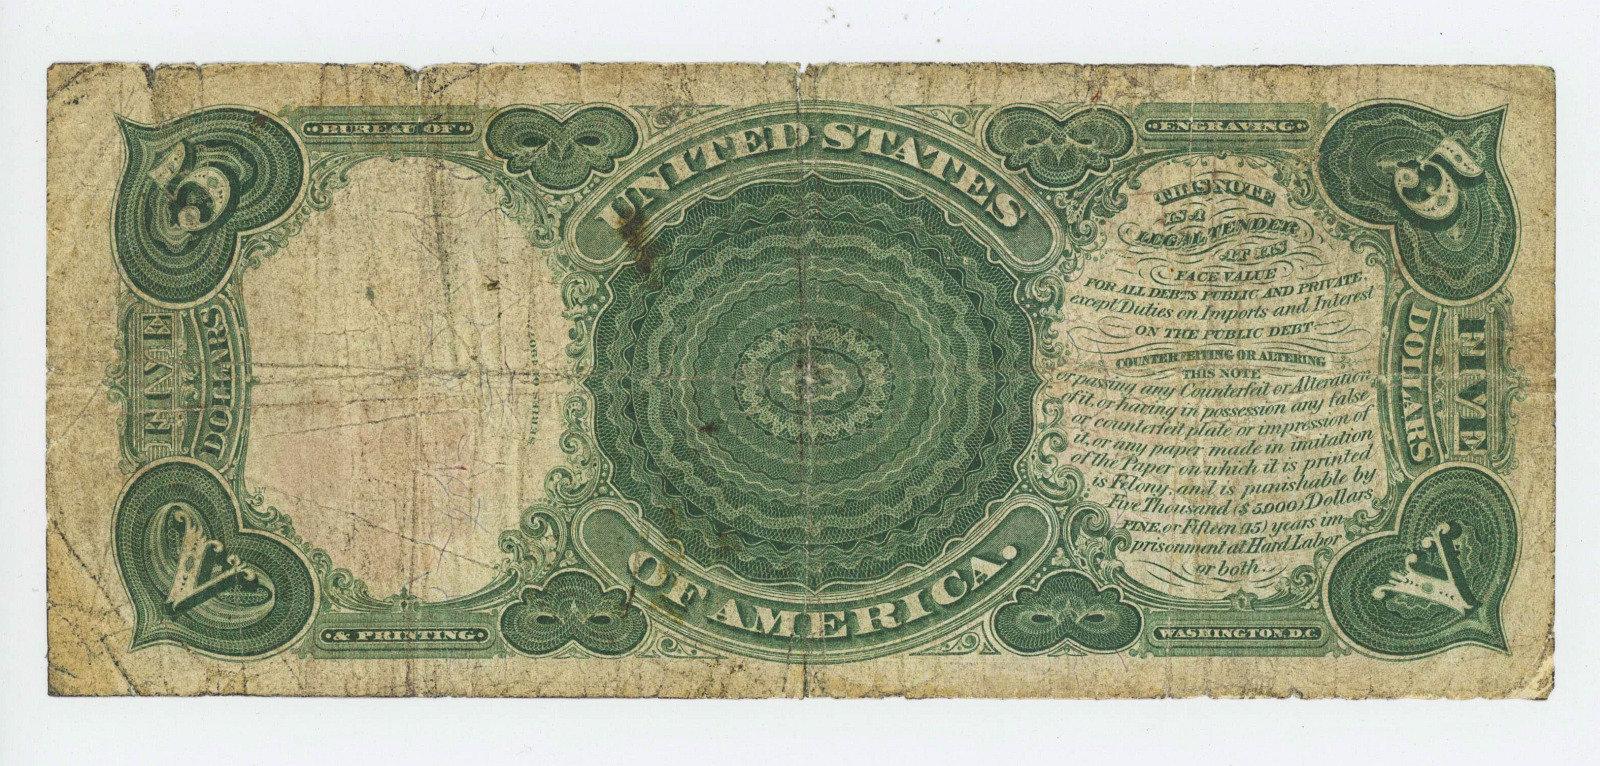 1907 FIVE DOLLAR UNITED STATES NOTE